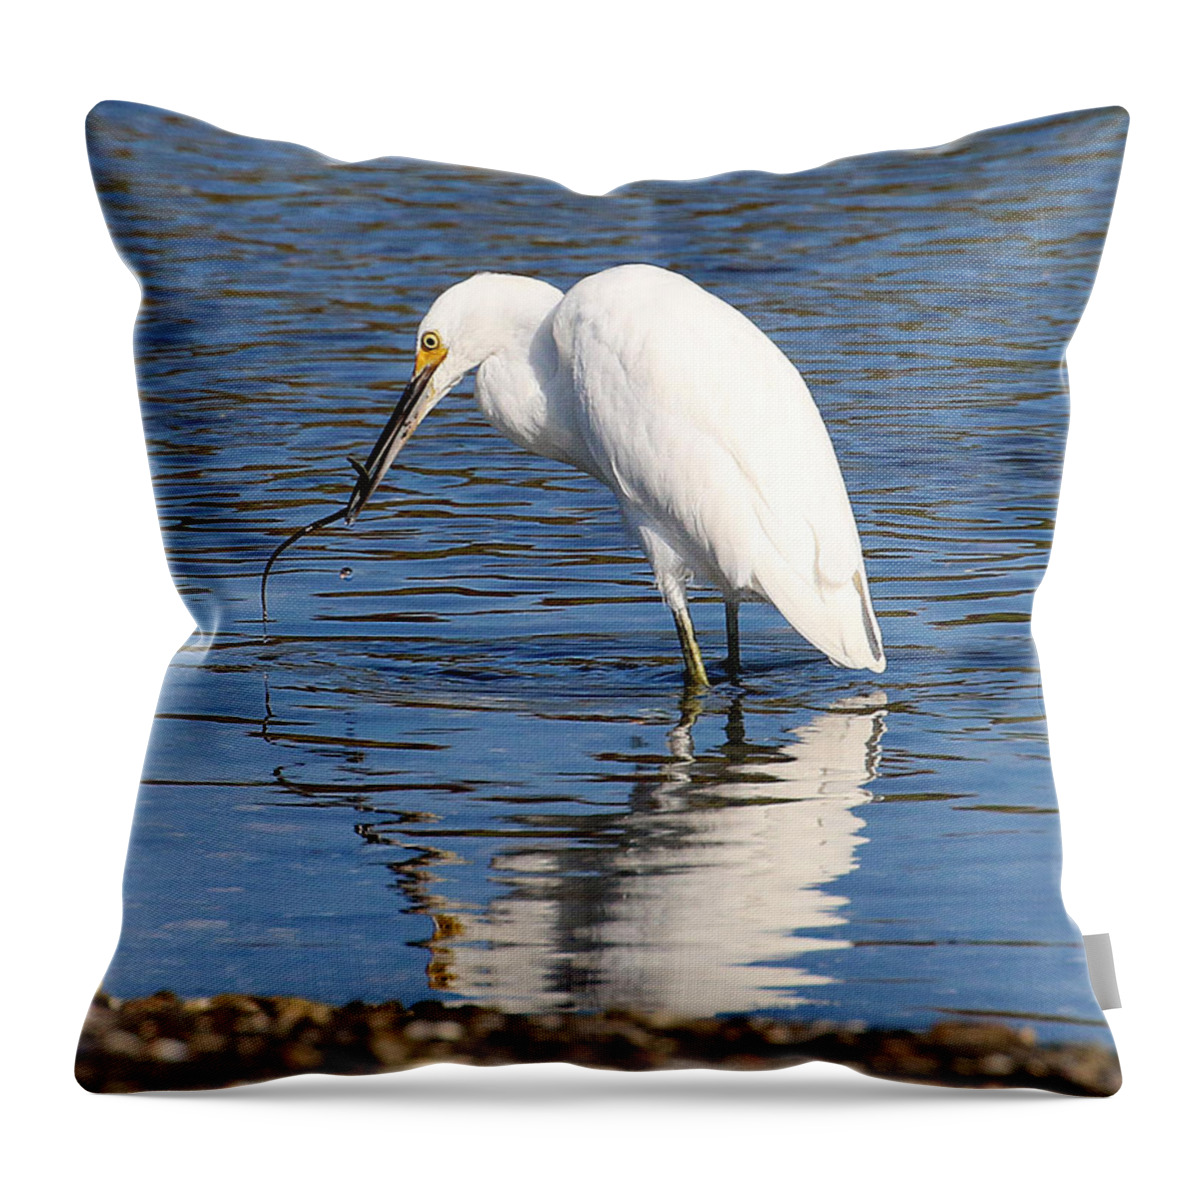 Wildlife Throw Pillow featuring the photograph Egret Eating Eel 4 by William Selander